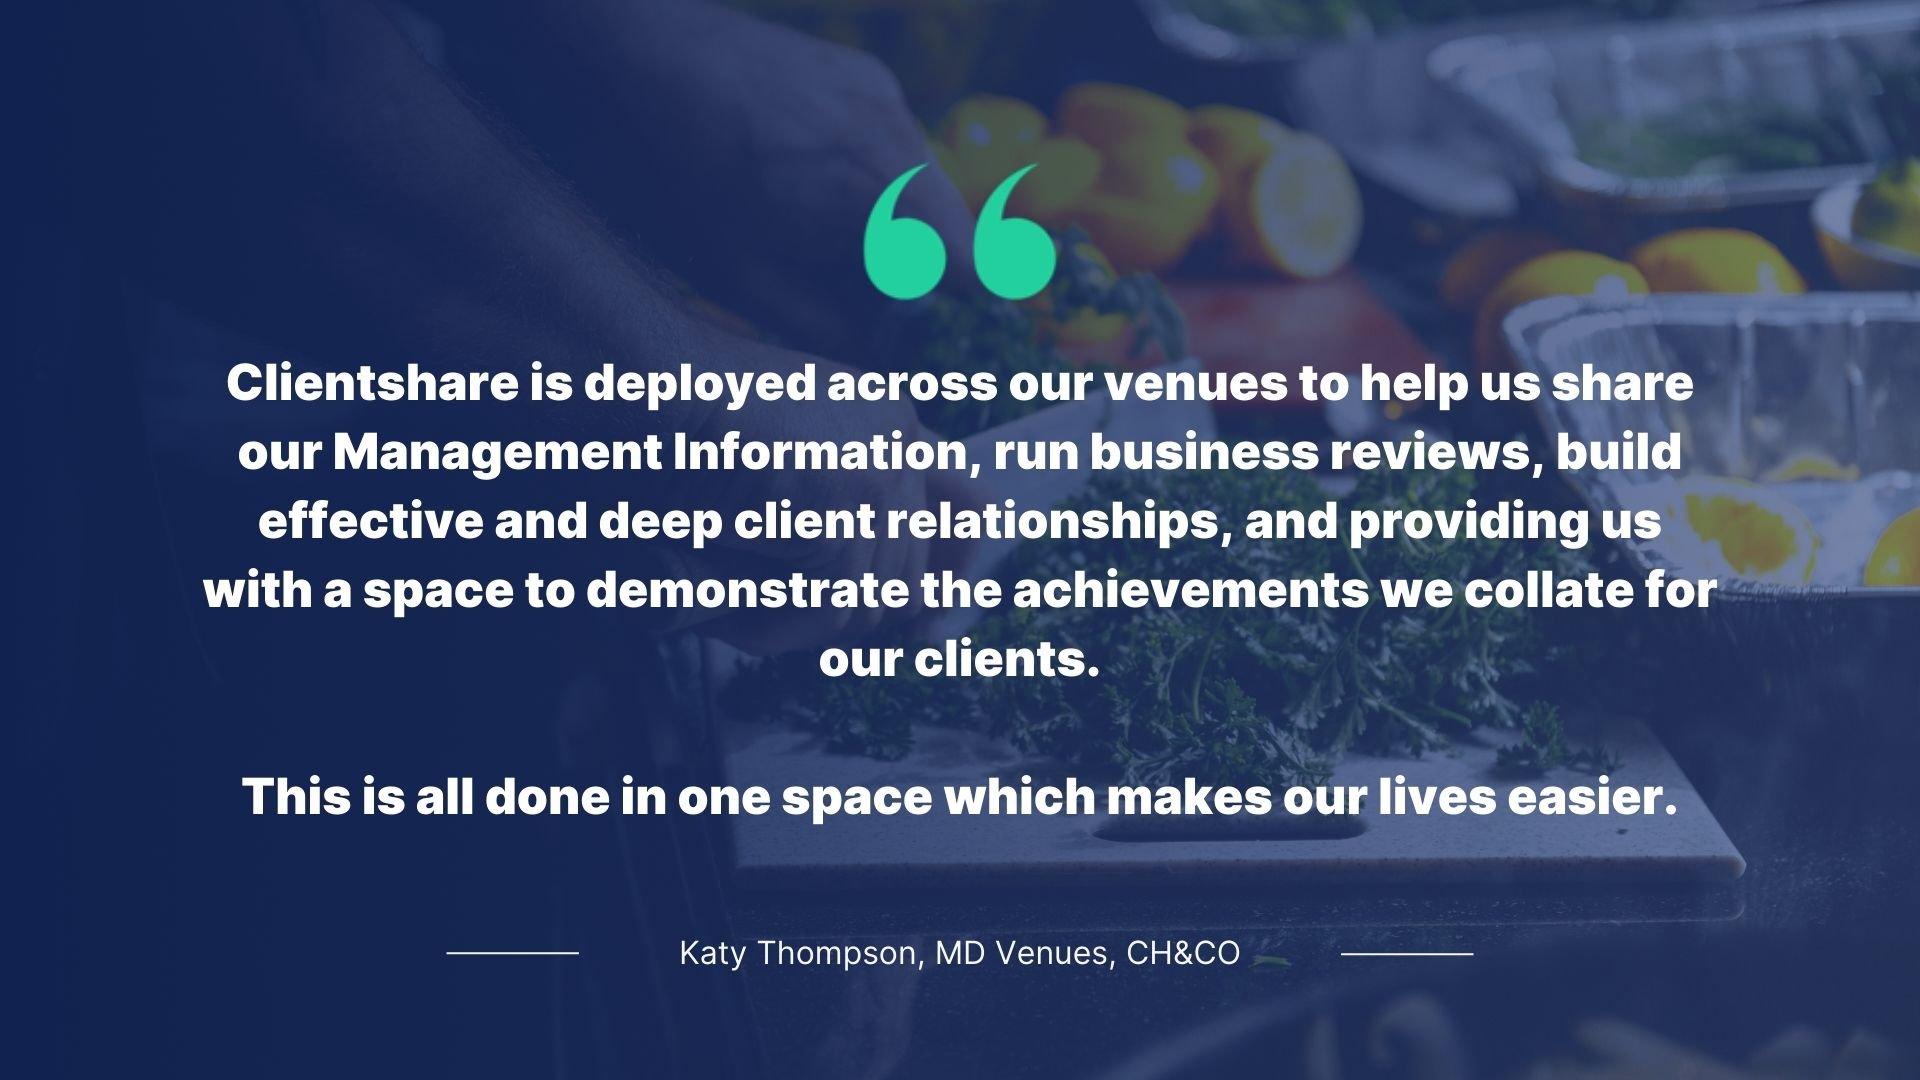 Quote by Katy Thompson, MD Venues, CH&CO: Clientshare is deployed across our venues to help us share our Management Information, run business reviews, build effective and deep client relationships, and providing us with a space to demonstarte the achievements we collate for our clients.  Thi sis all done in one space which makes our lives easier.